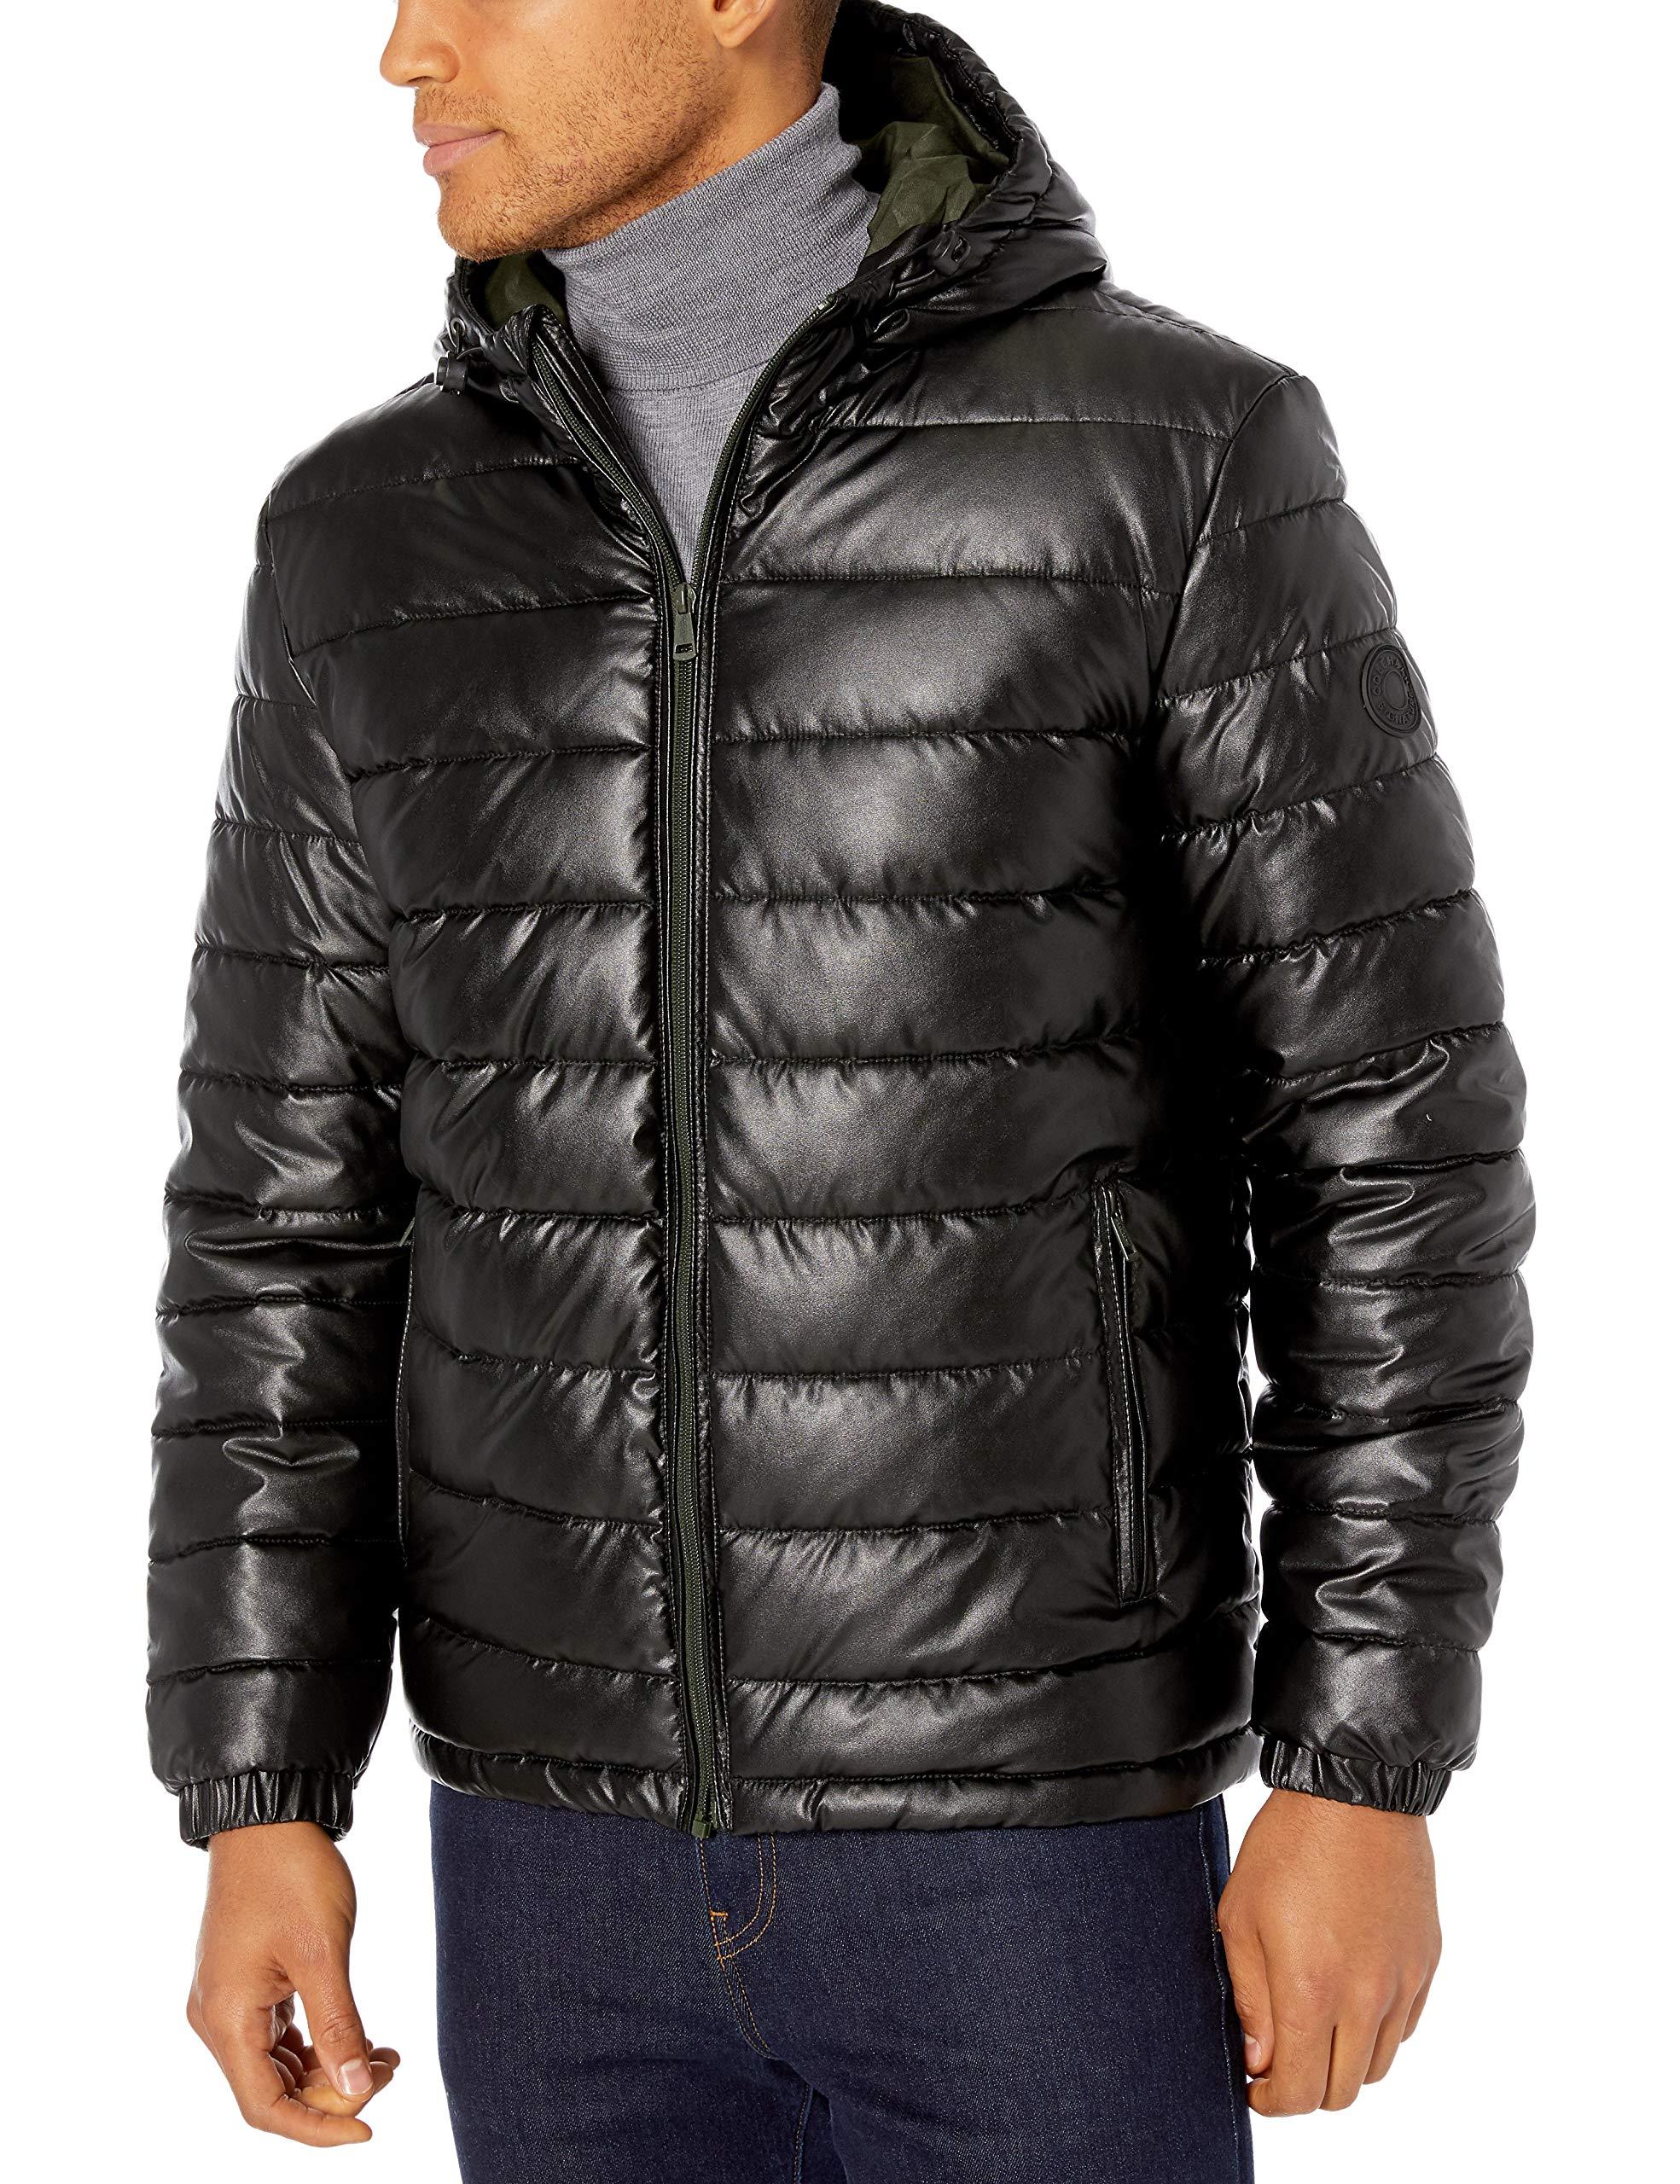 Cole Haan Hooded Faux Leather Down Jacket in Black/Olive Camo (Black ...